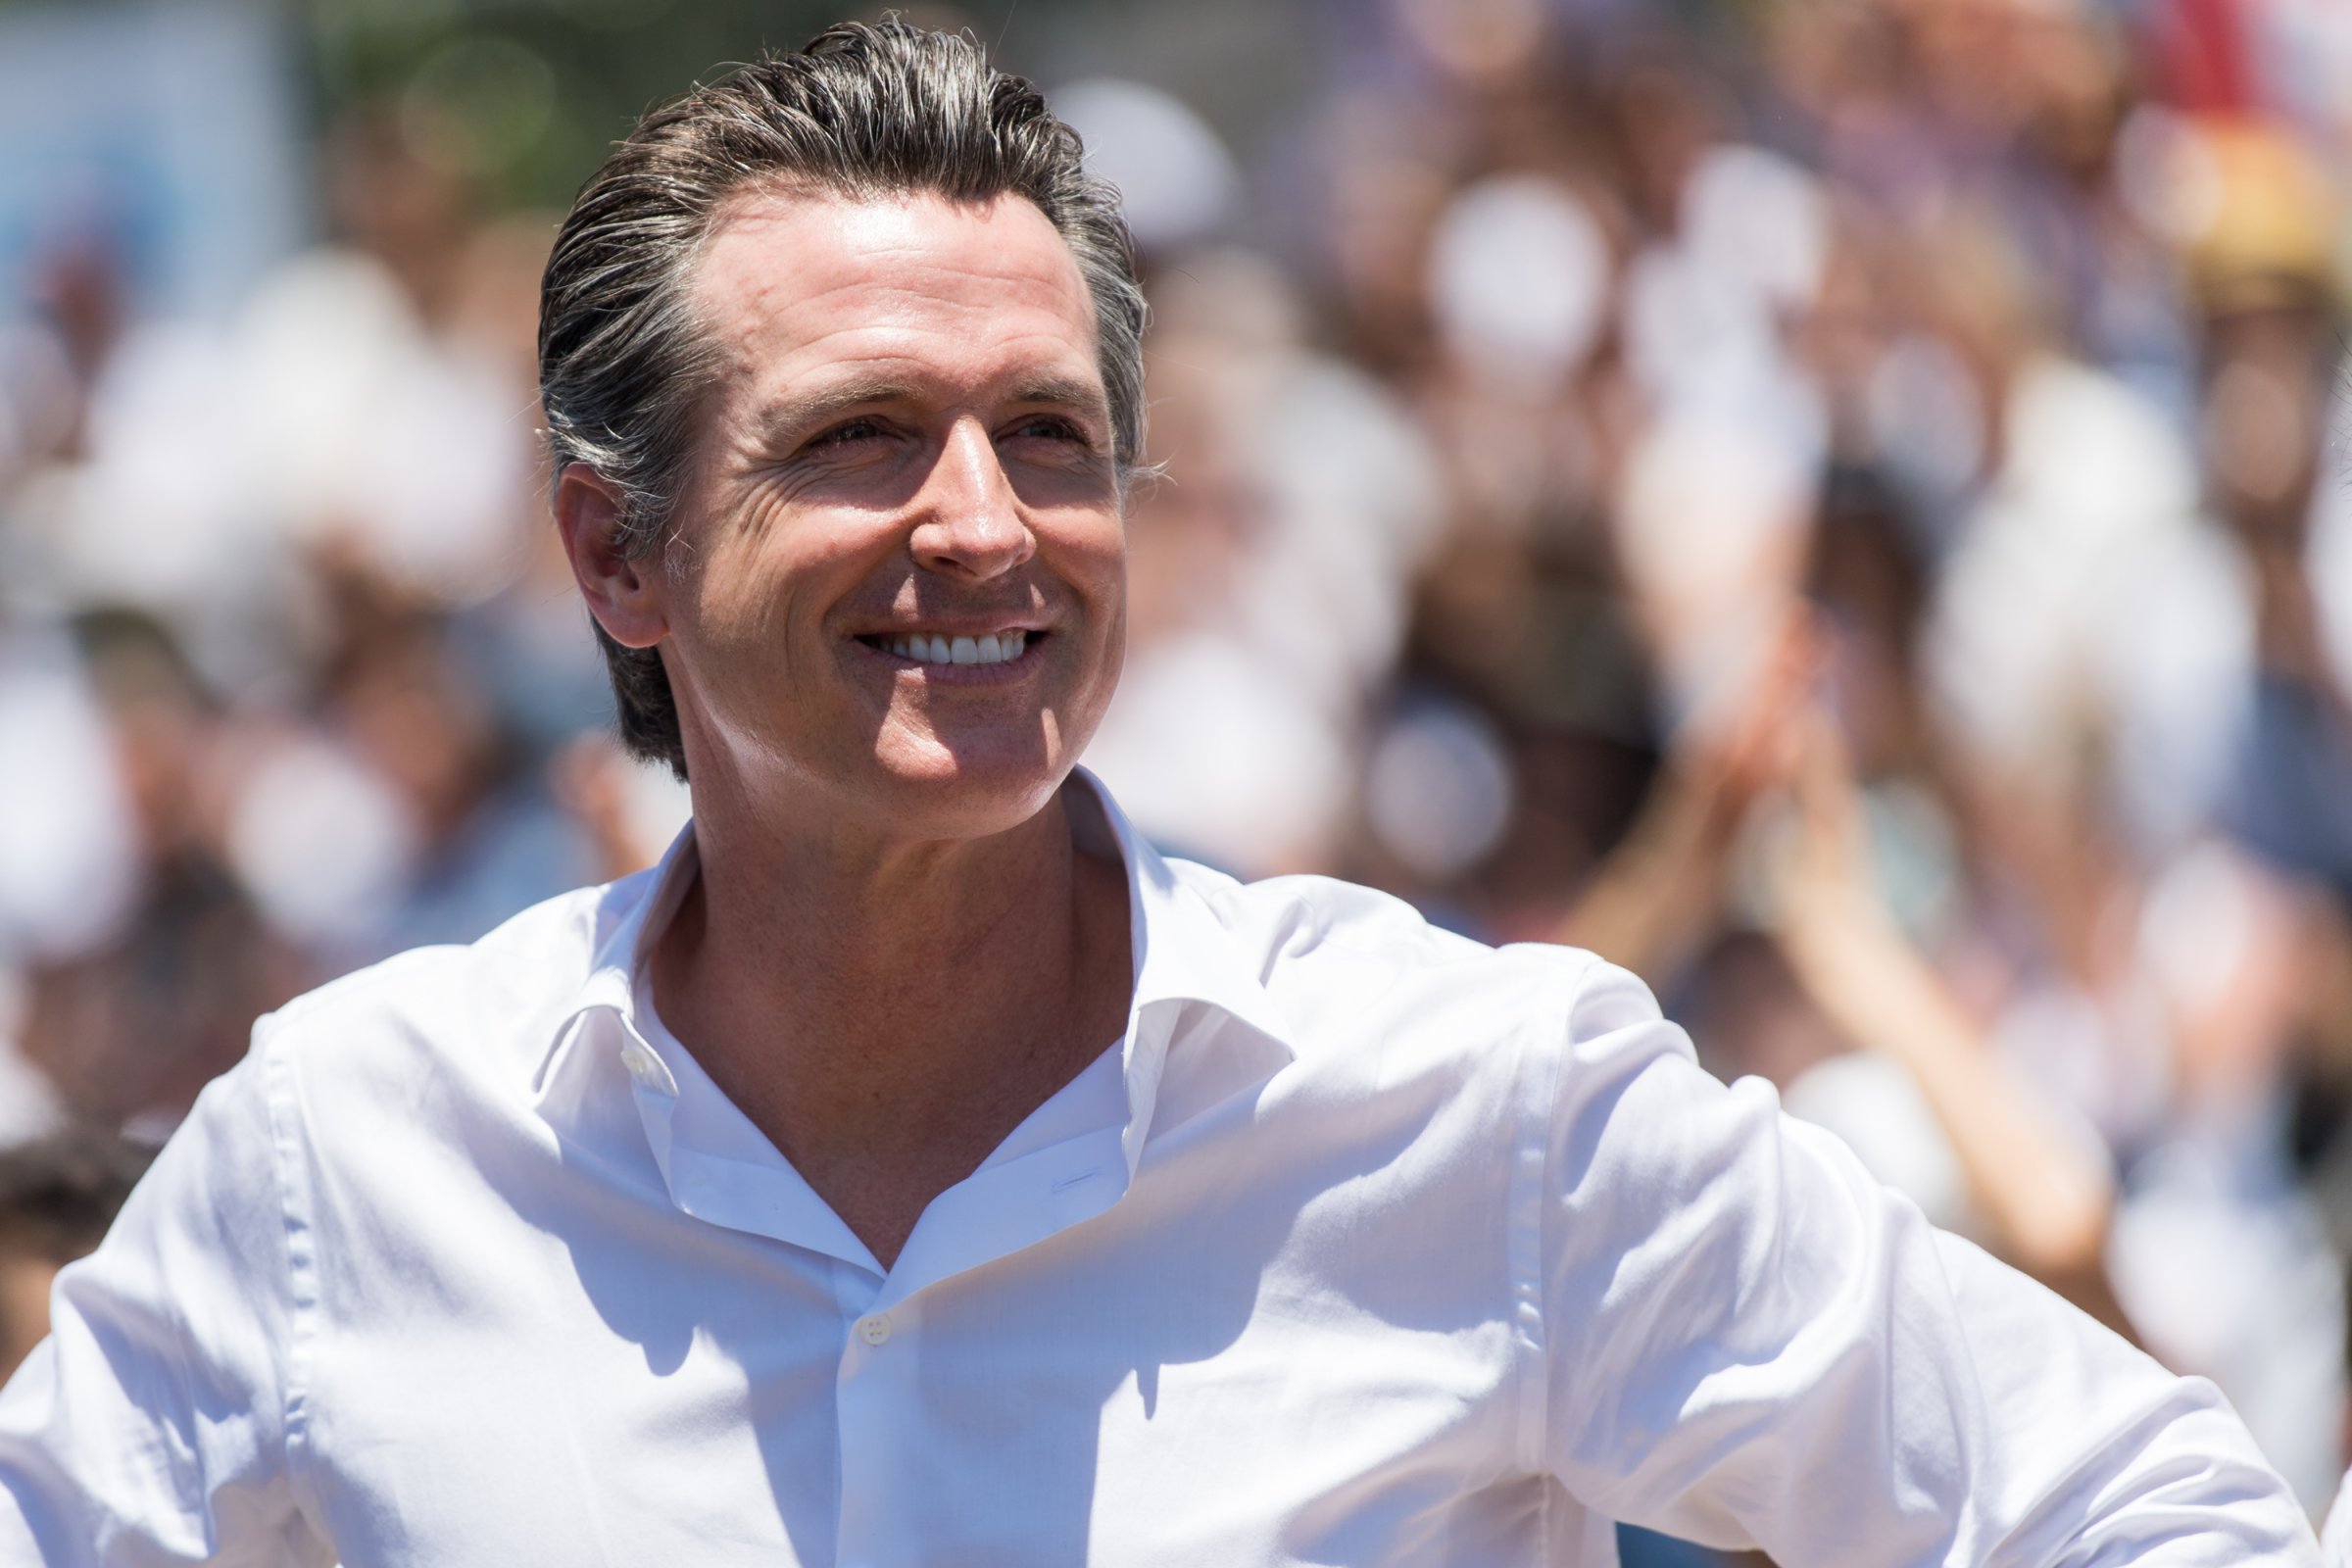 Newsom smiling to the crowd